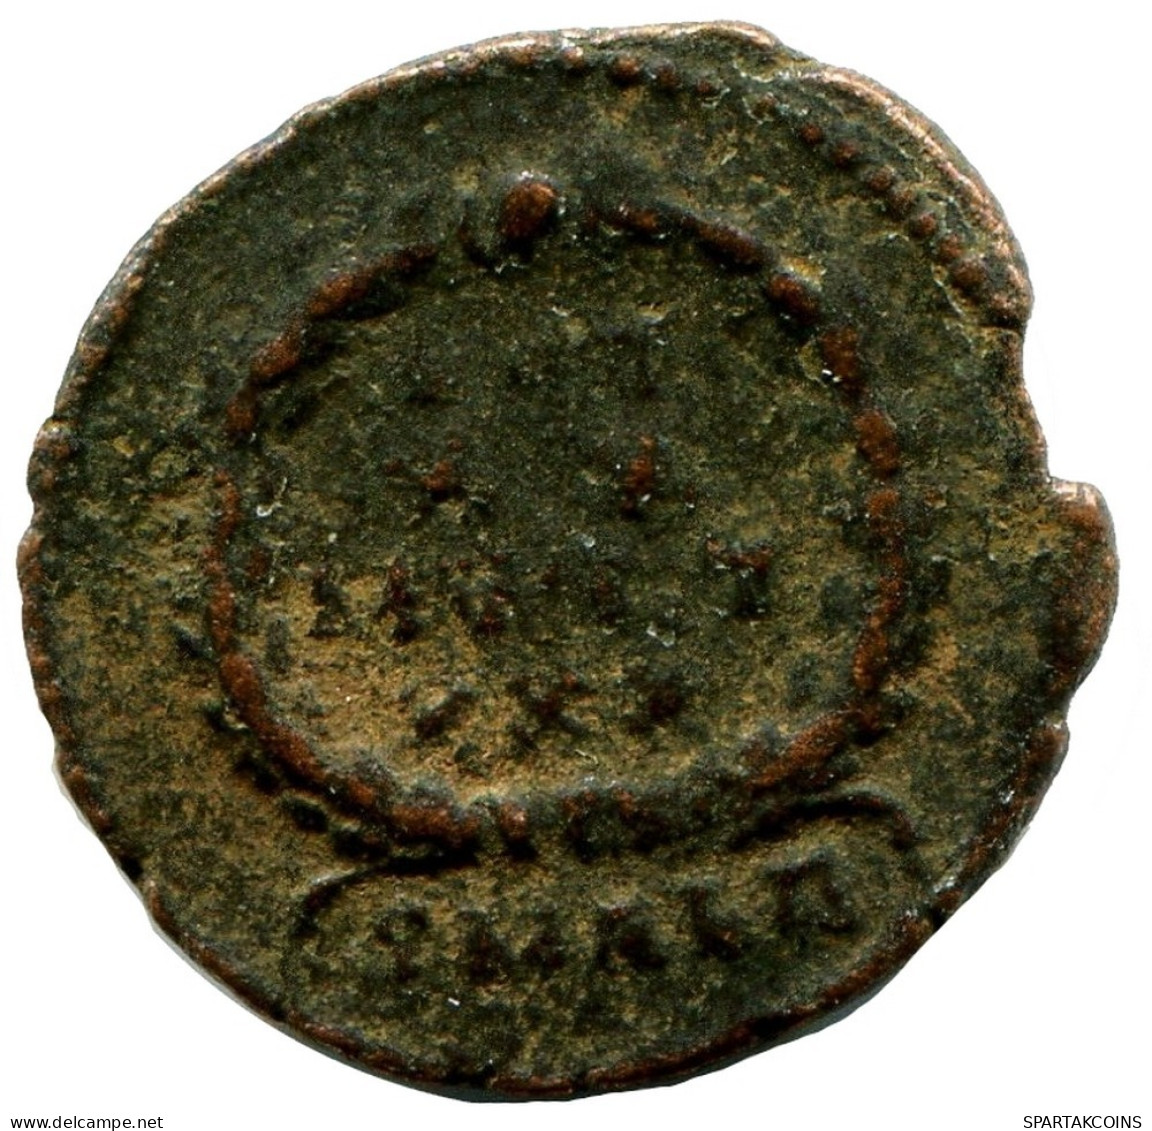 CONSTANS MINTED IN ALEKSANDRIA FOUND IN IHNASYAH HOARD EGYPT #ANC11478.14.E.A - The Christian Empire (307 AD To 363 AD)